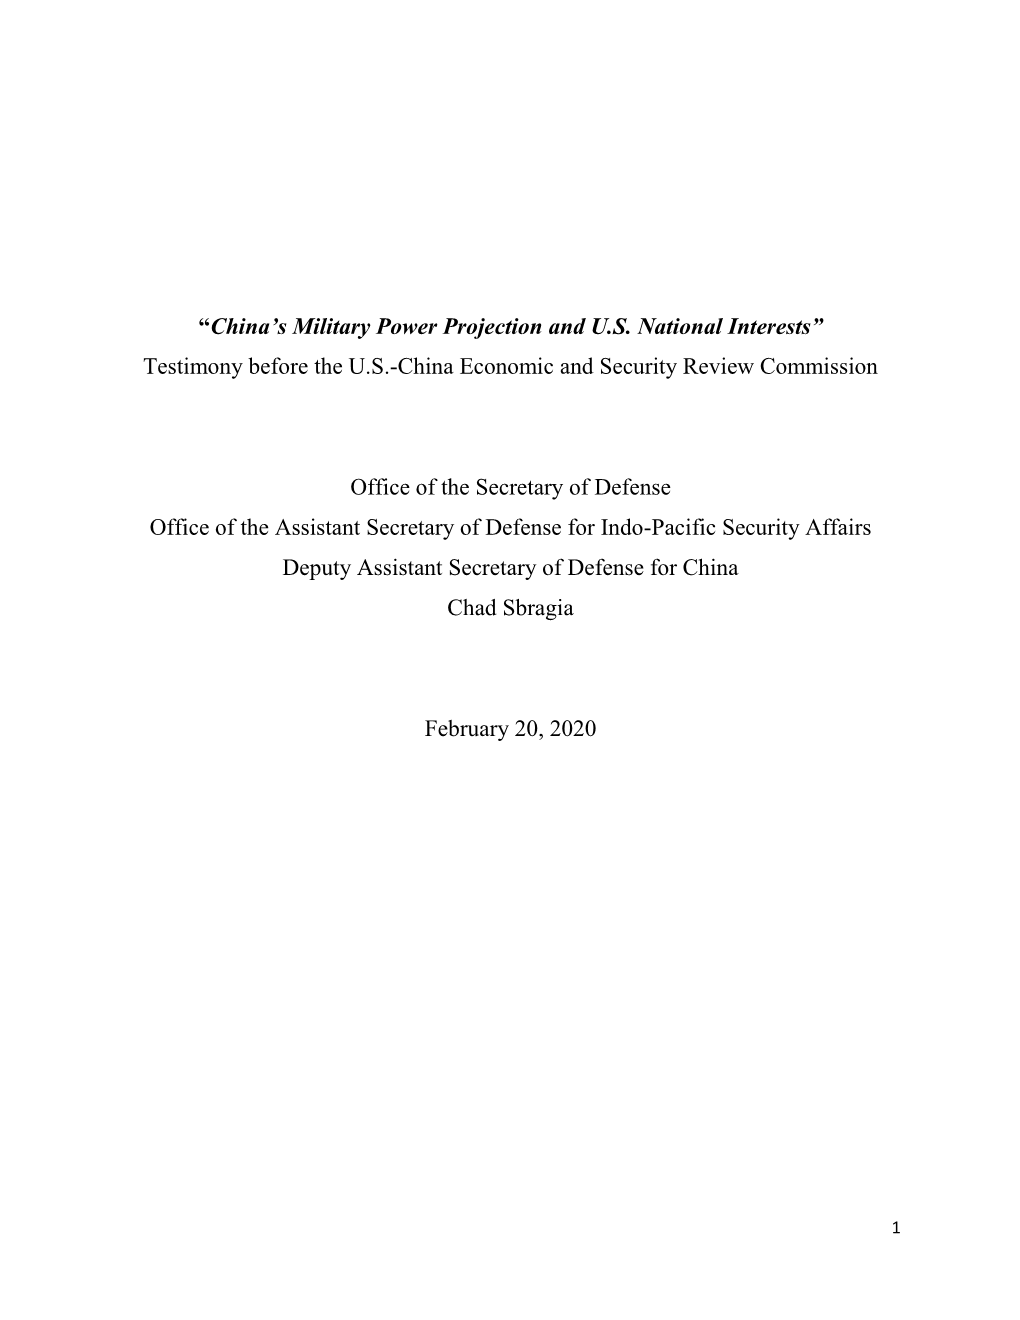 “China's Military Power Projection and U.S. National Interests” Testimony